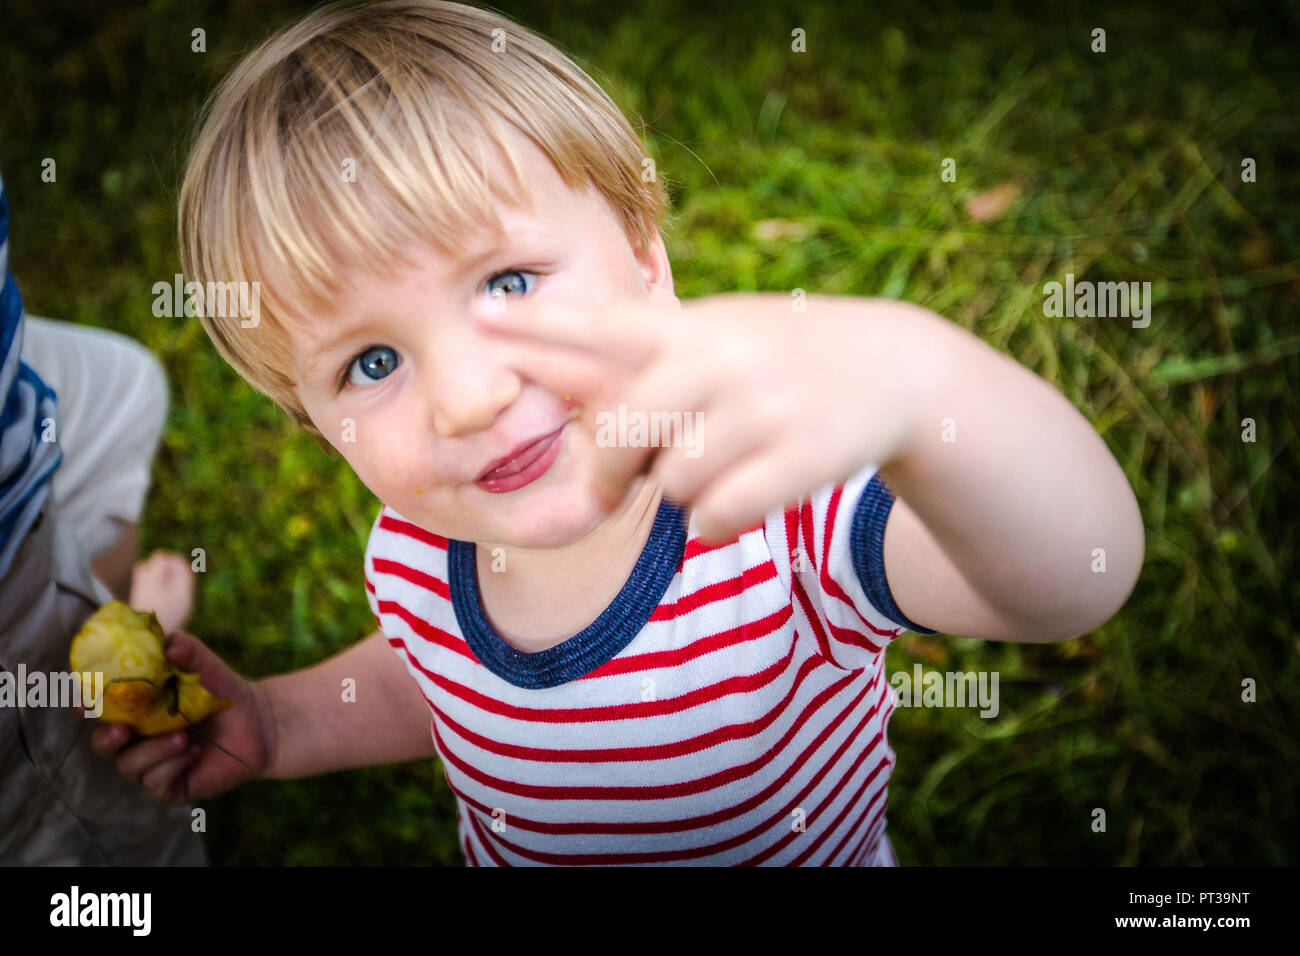 Toddler, two-year-old with red and white striped tee, cheeky, facing camera Stock Photo